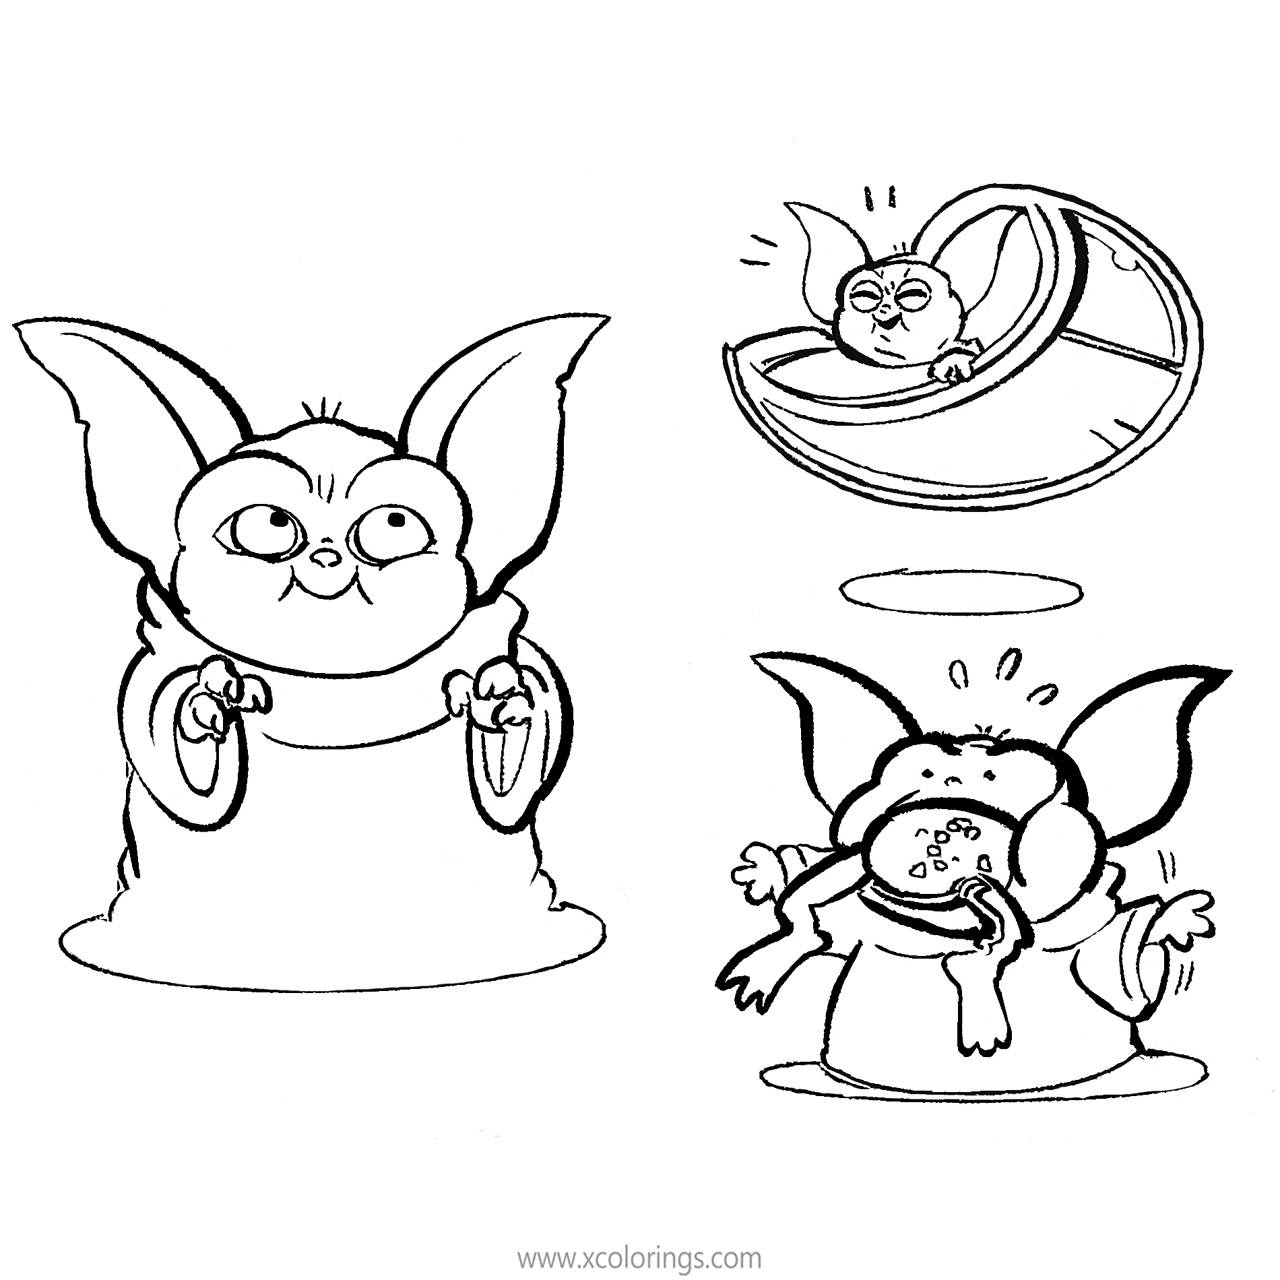 Free Baby Yoda Fanart Coloring Pages printable